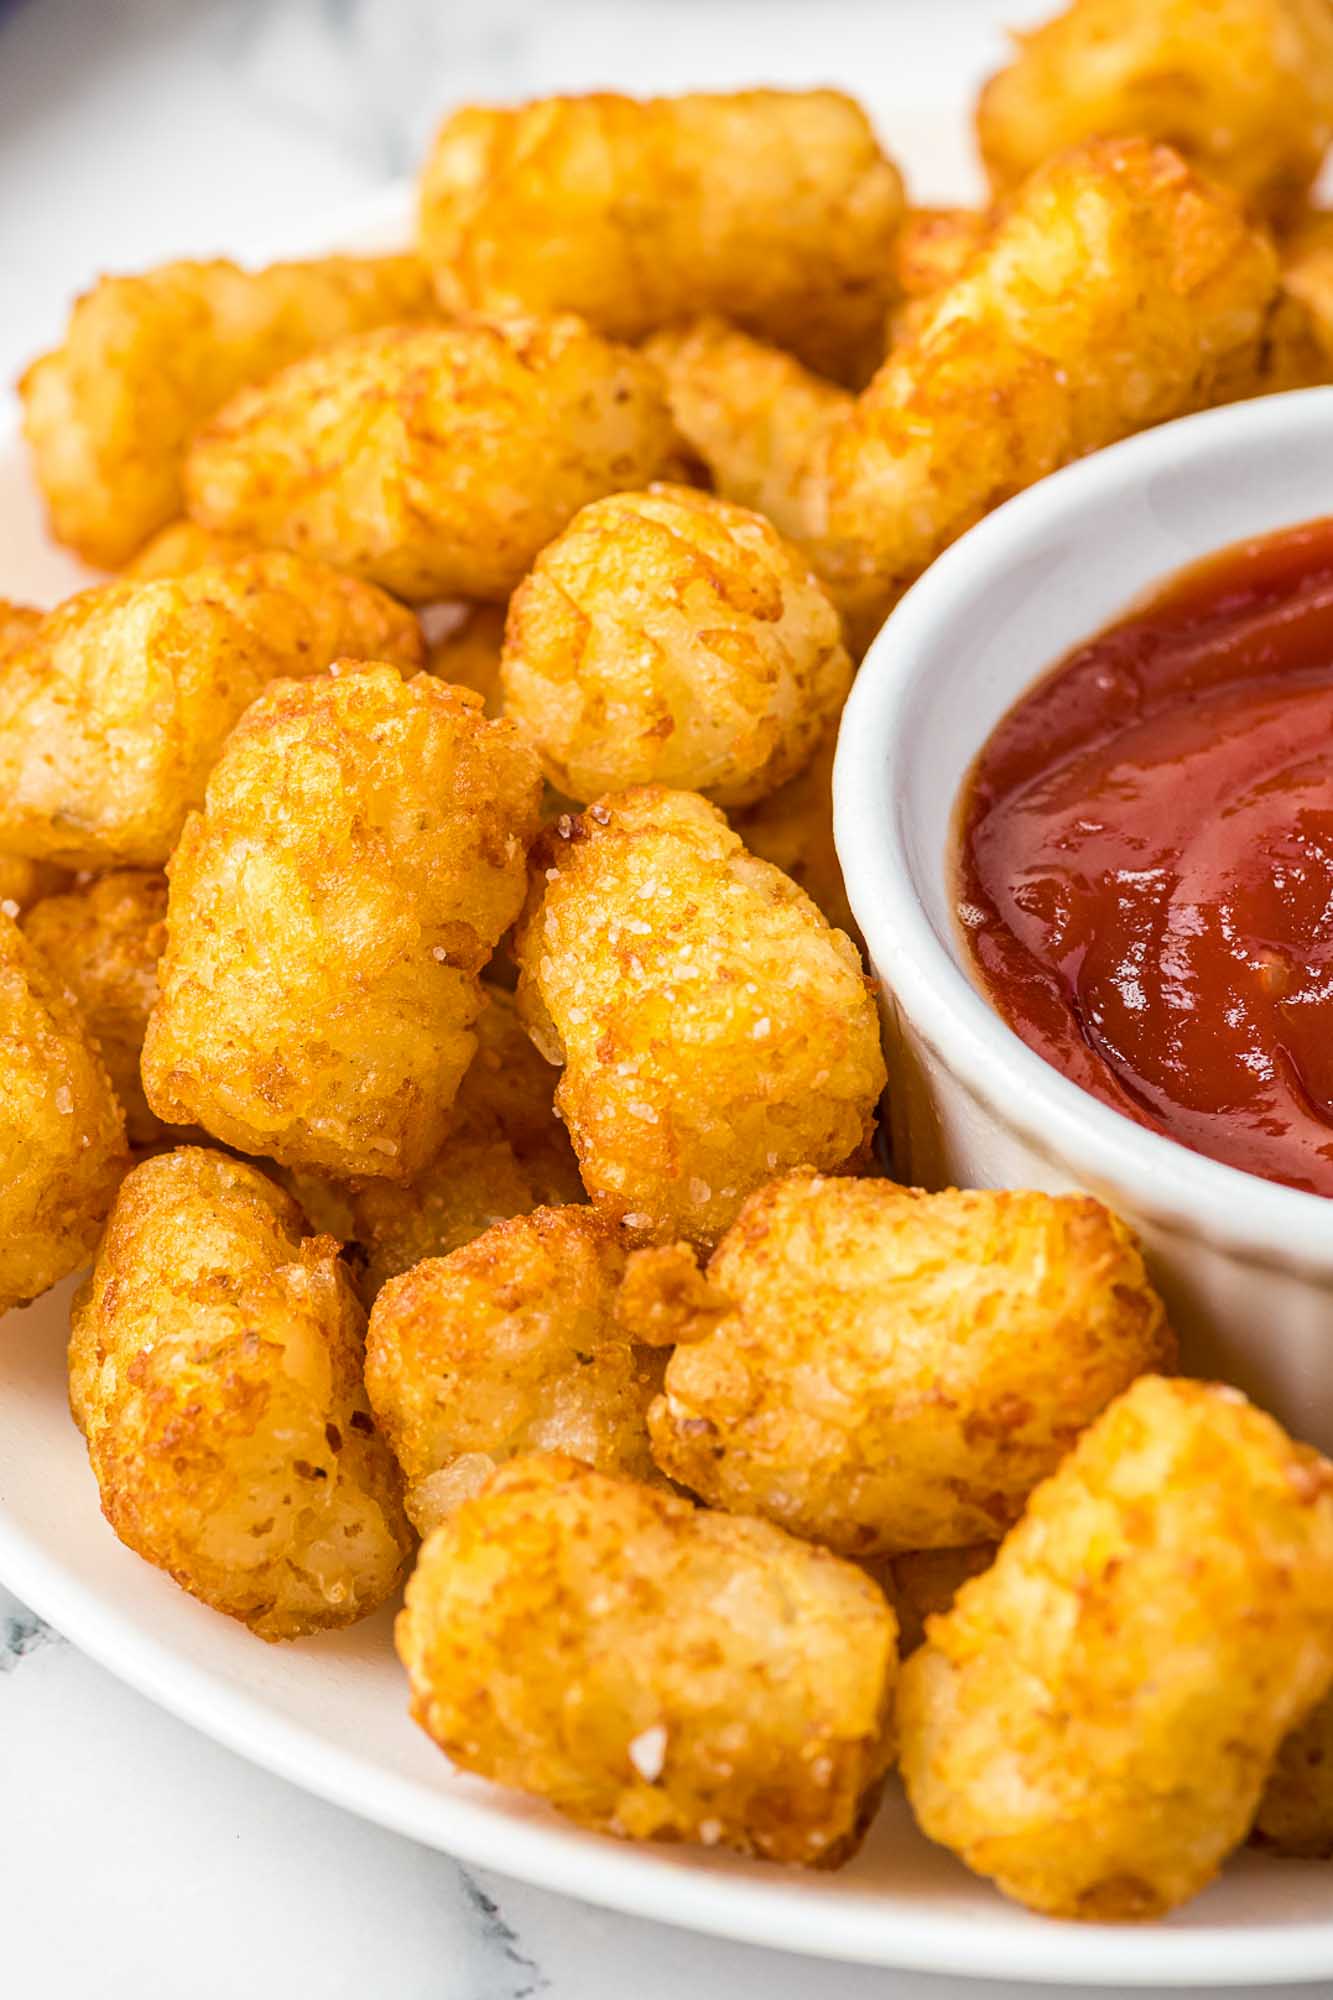 Crispy tater tots served on a plate with a side of ketchup.